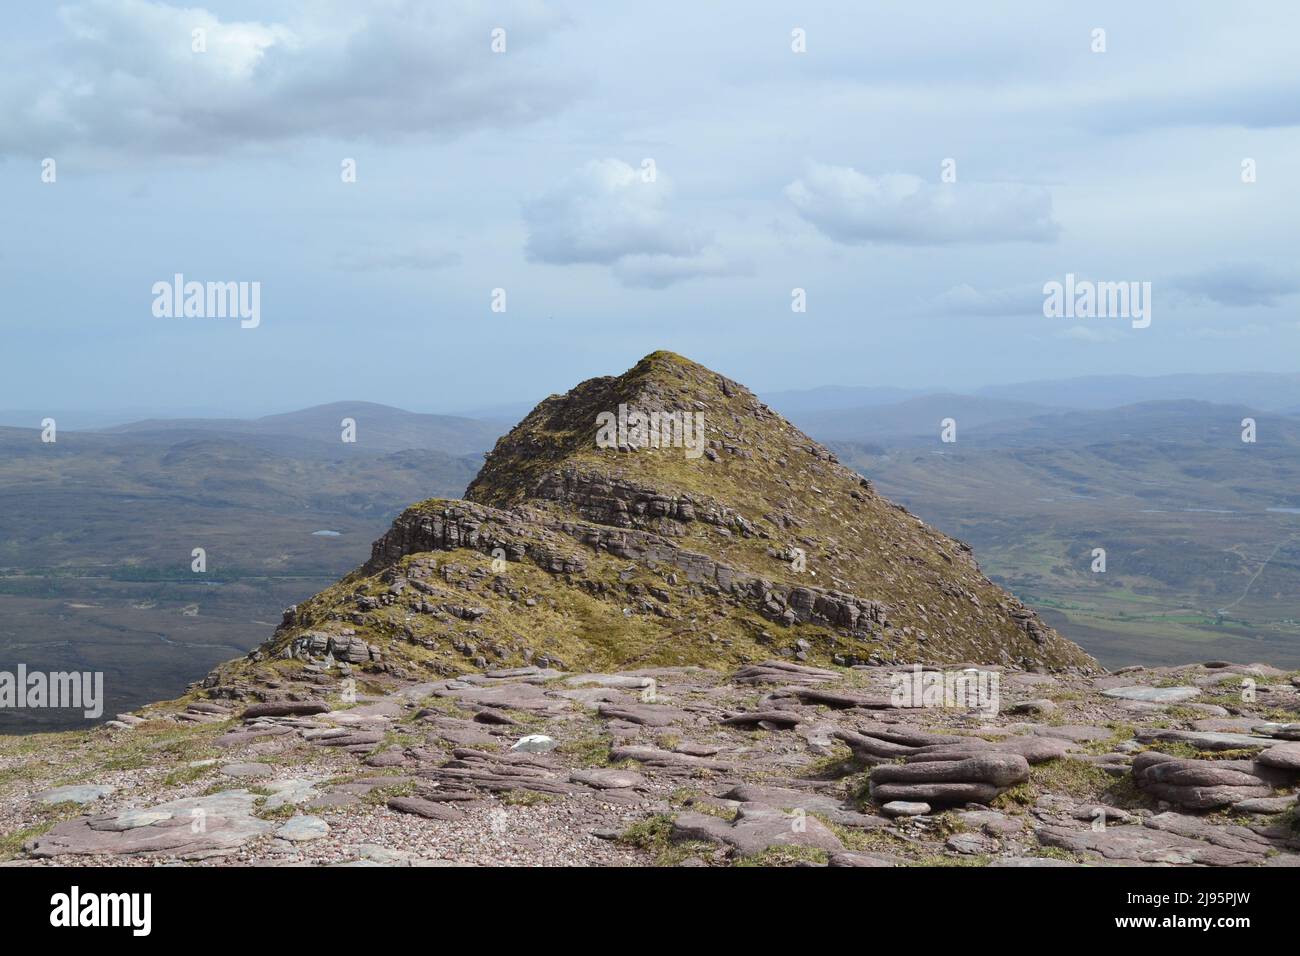 Ben Mor Coigach, a 700m ridge near Ullapool, hikers, walkers, views of Summer Isles and Suilven mountain, Stac Poilaidh and Cul Mor views Sandstone Stock Photo